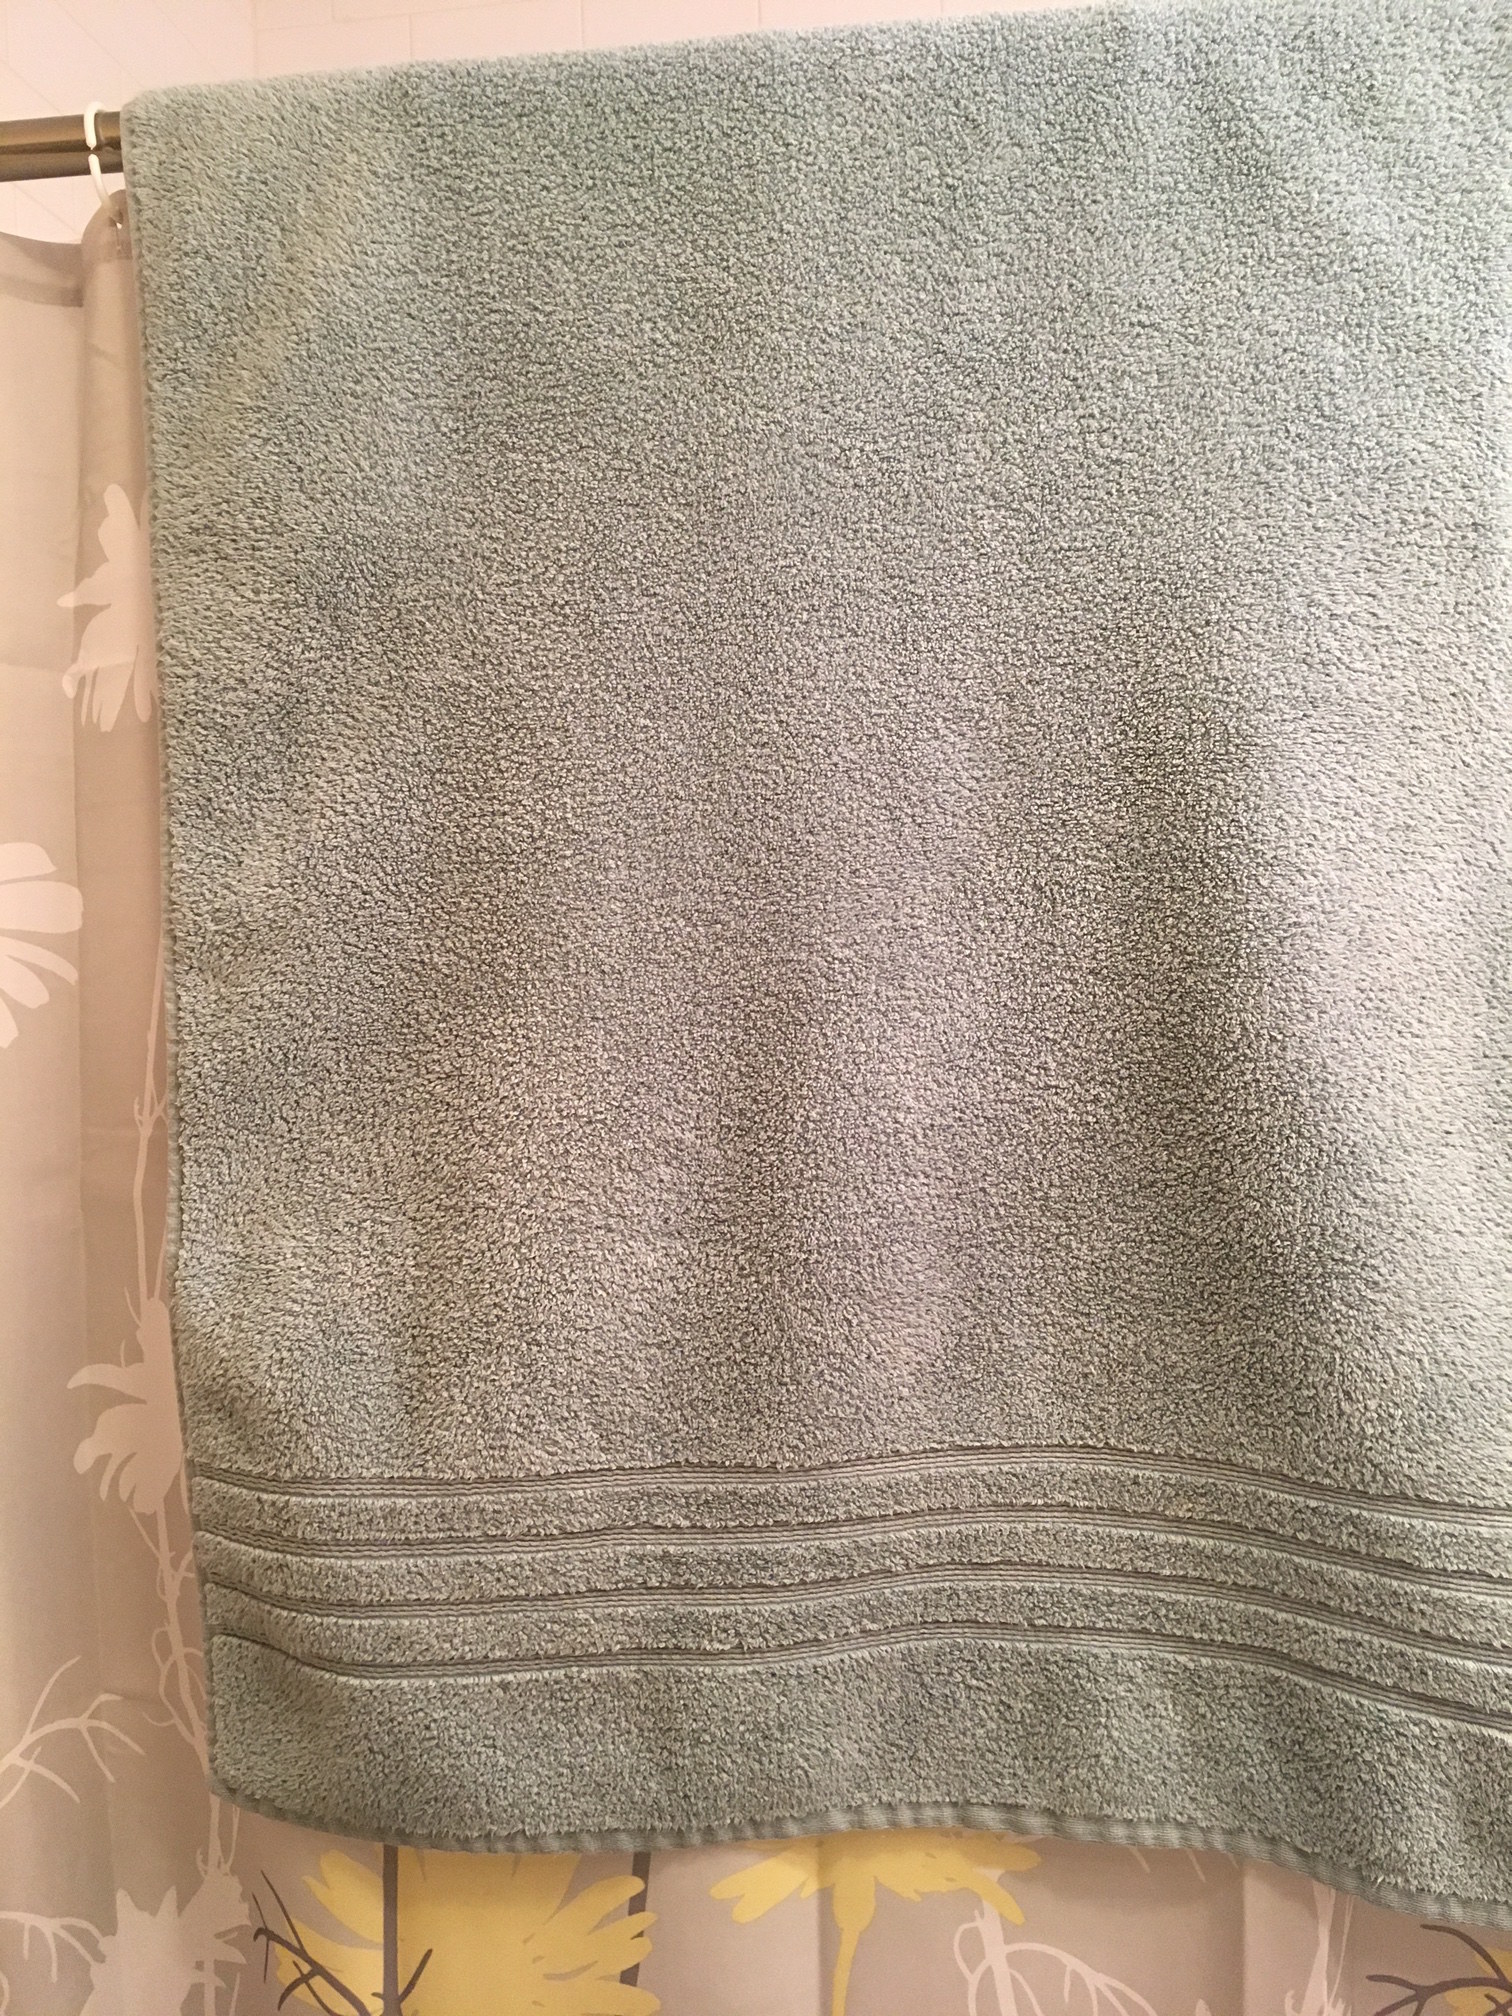 These Towels From Target Are The Best Towels In The World And I Will Not  Hear Otherwise